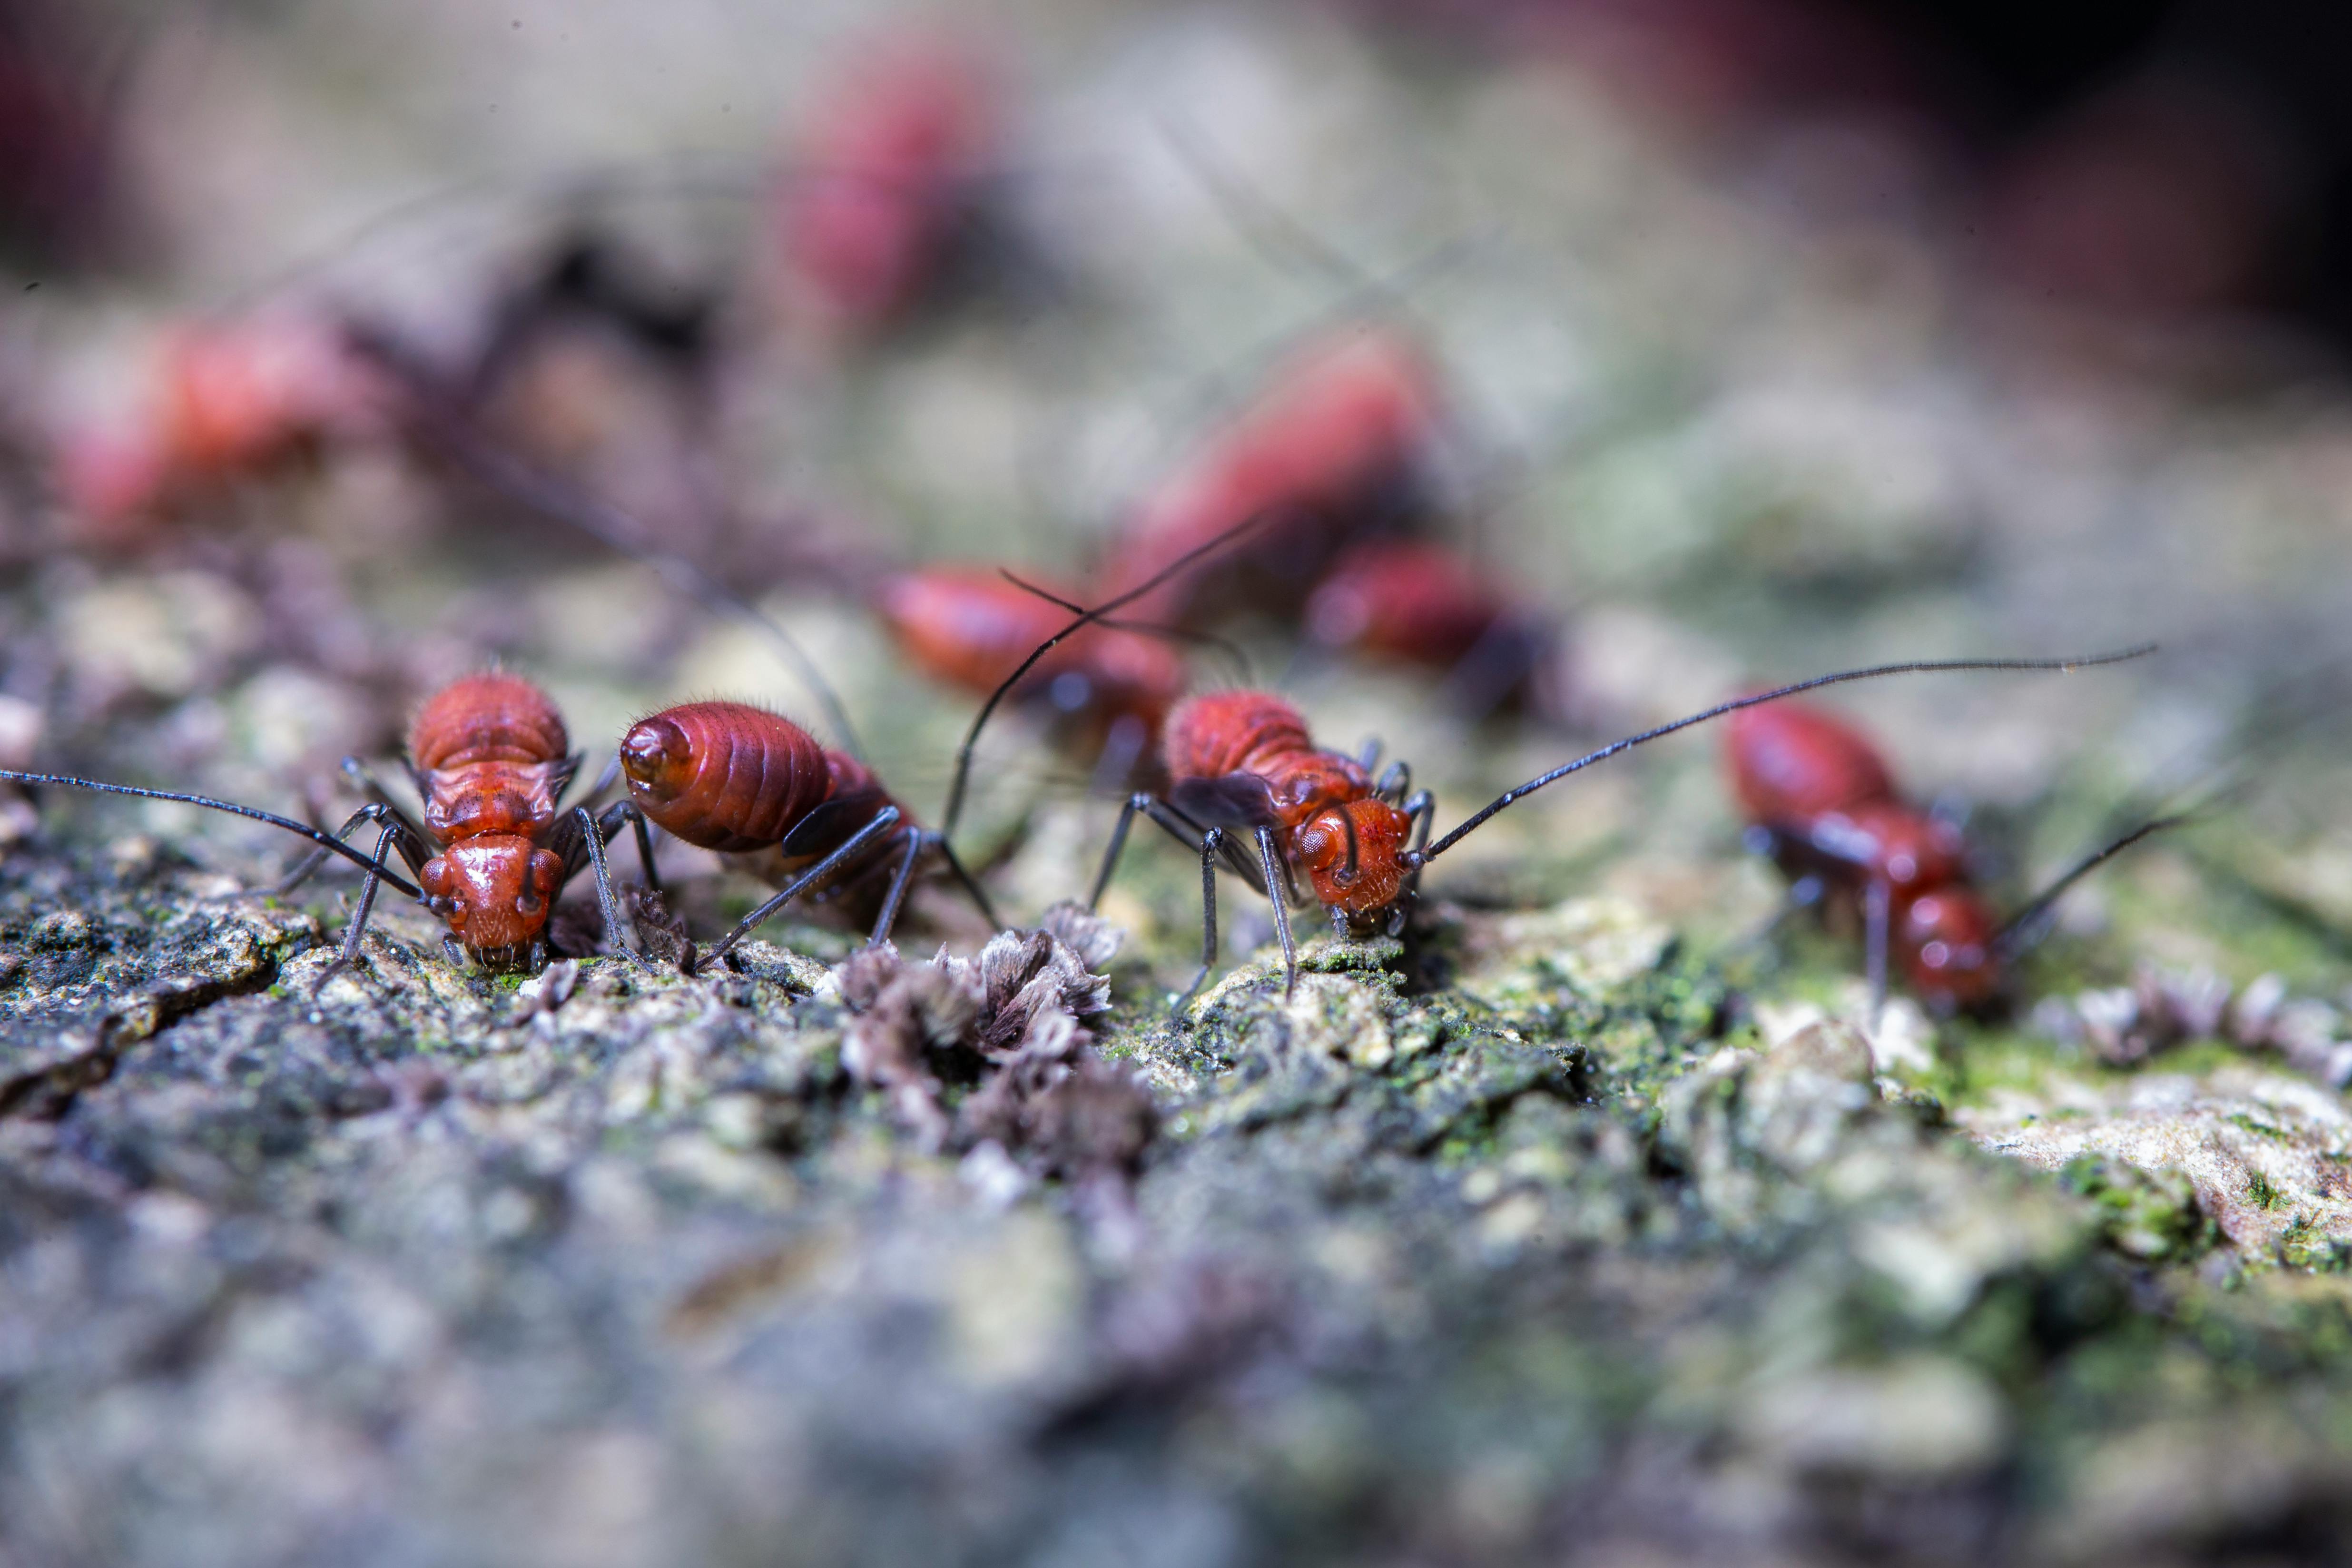 Ant Control Experts in Bastrop, TX